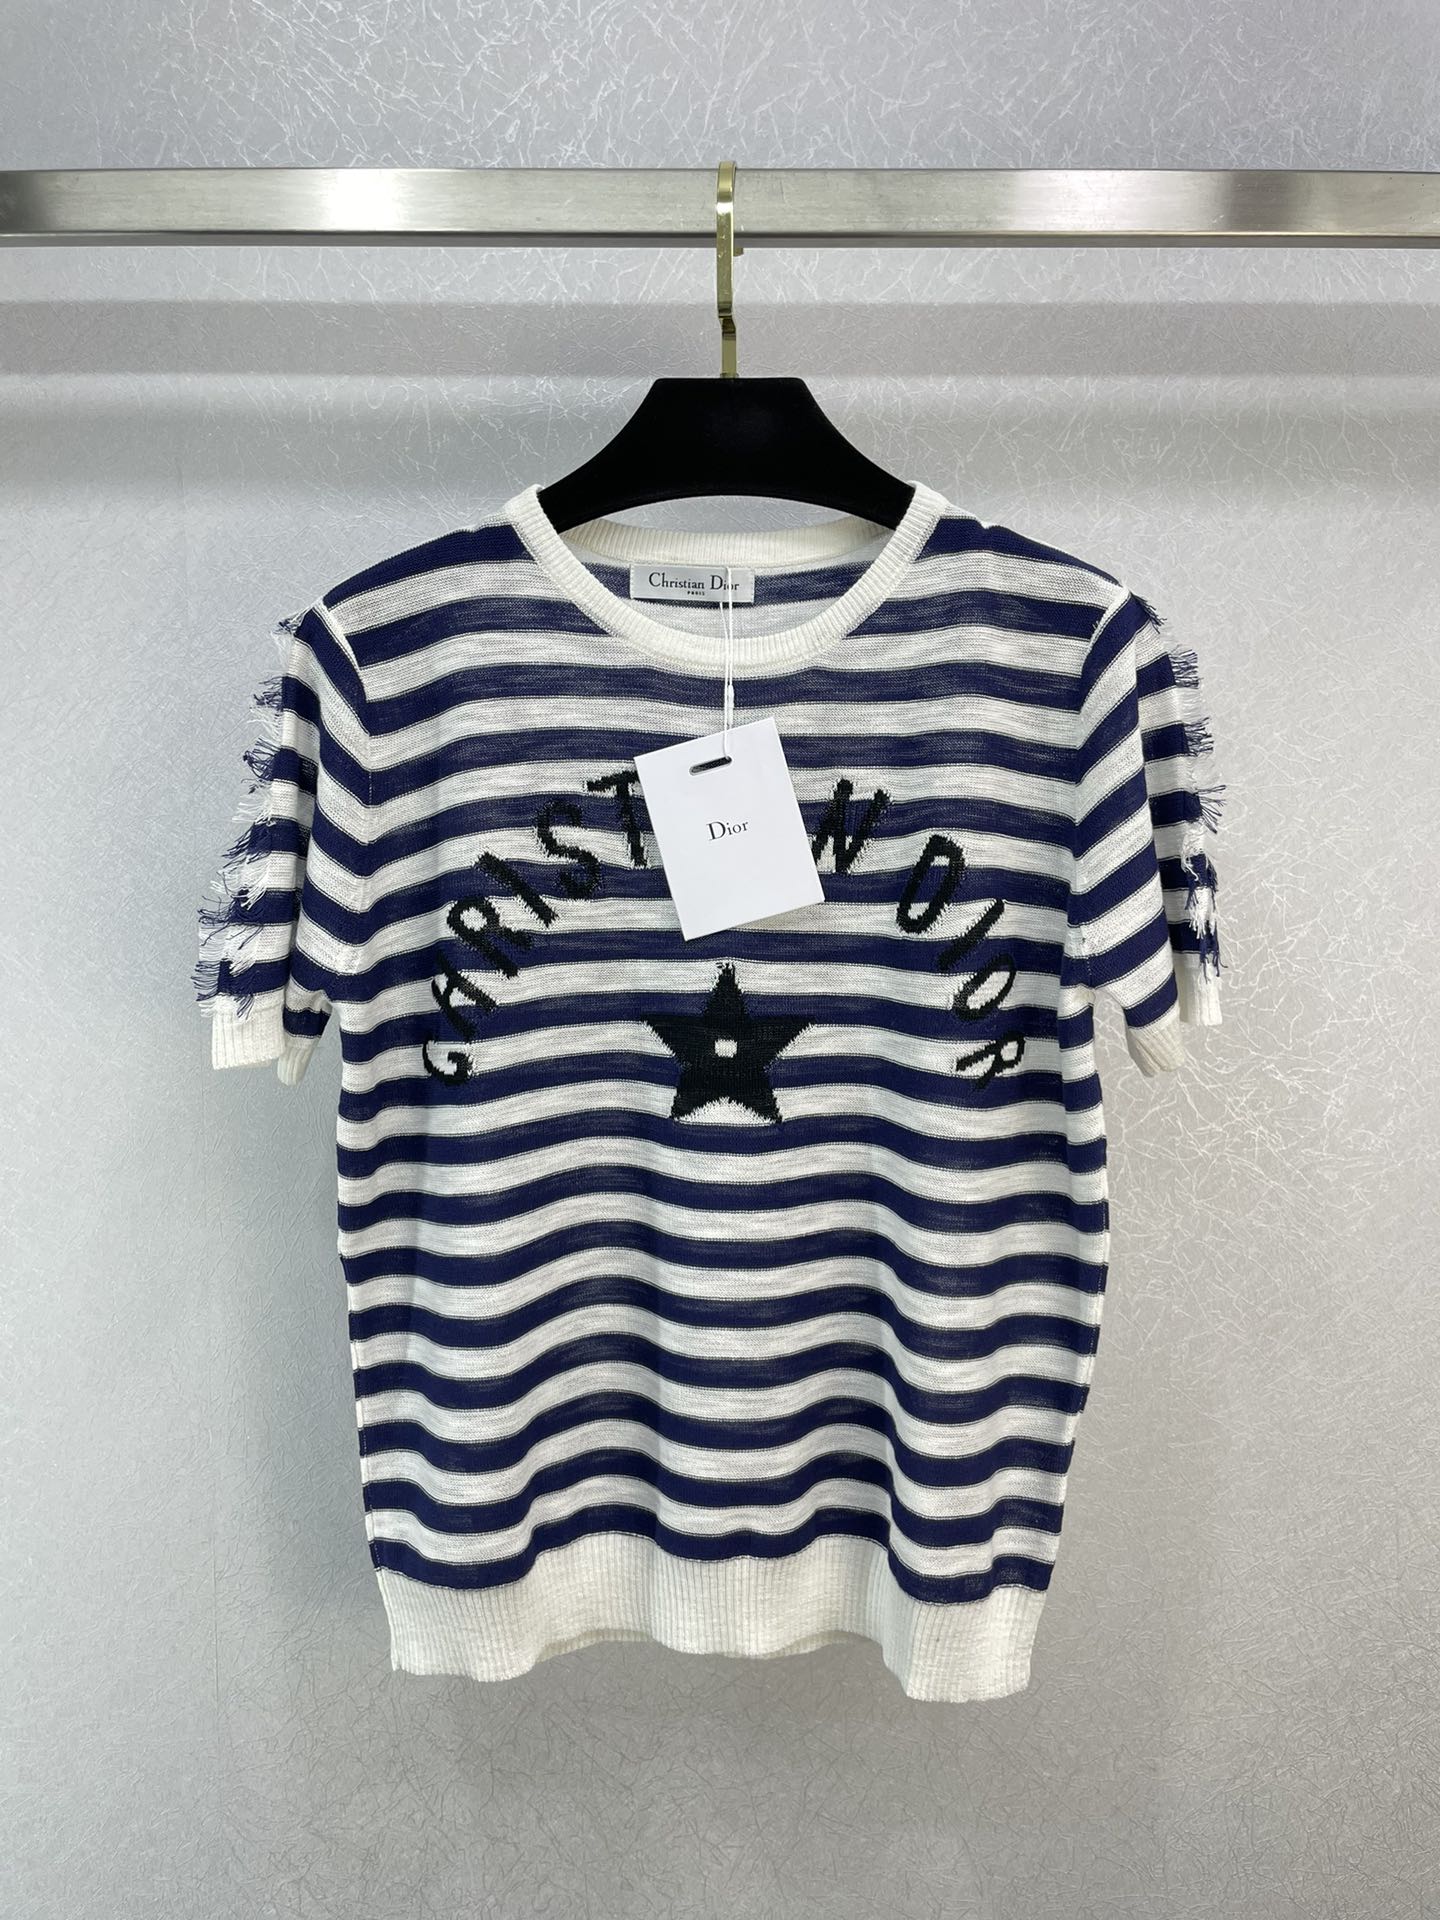 Dior Clothing Sweatshirts T-Shirt Blue White Spring Collection Short Sleeve